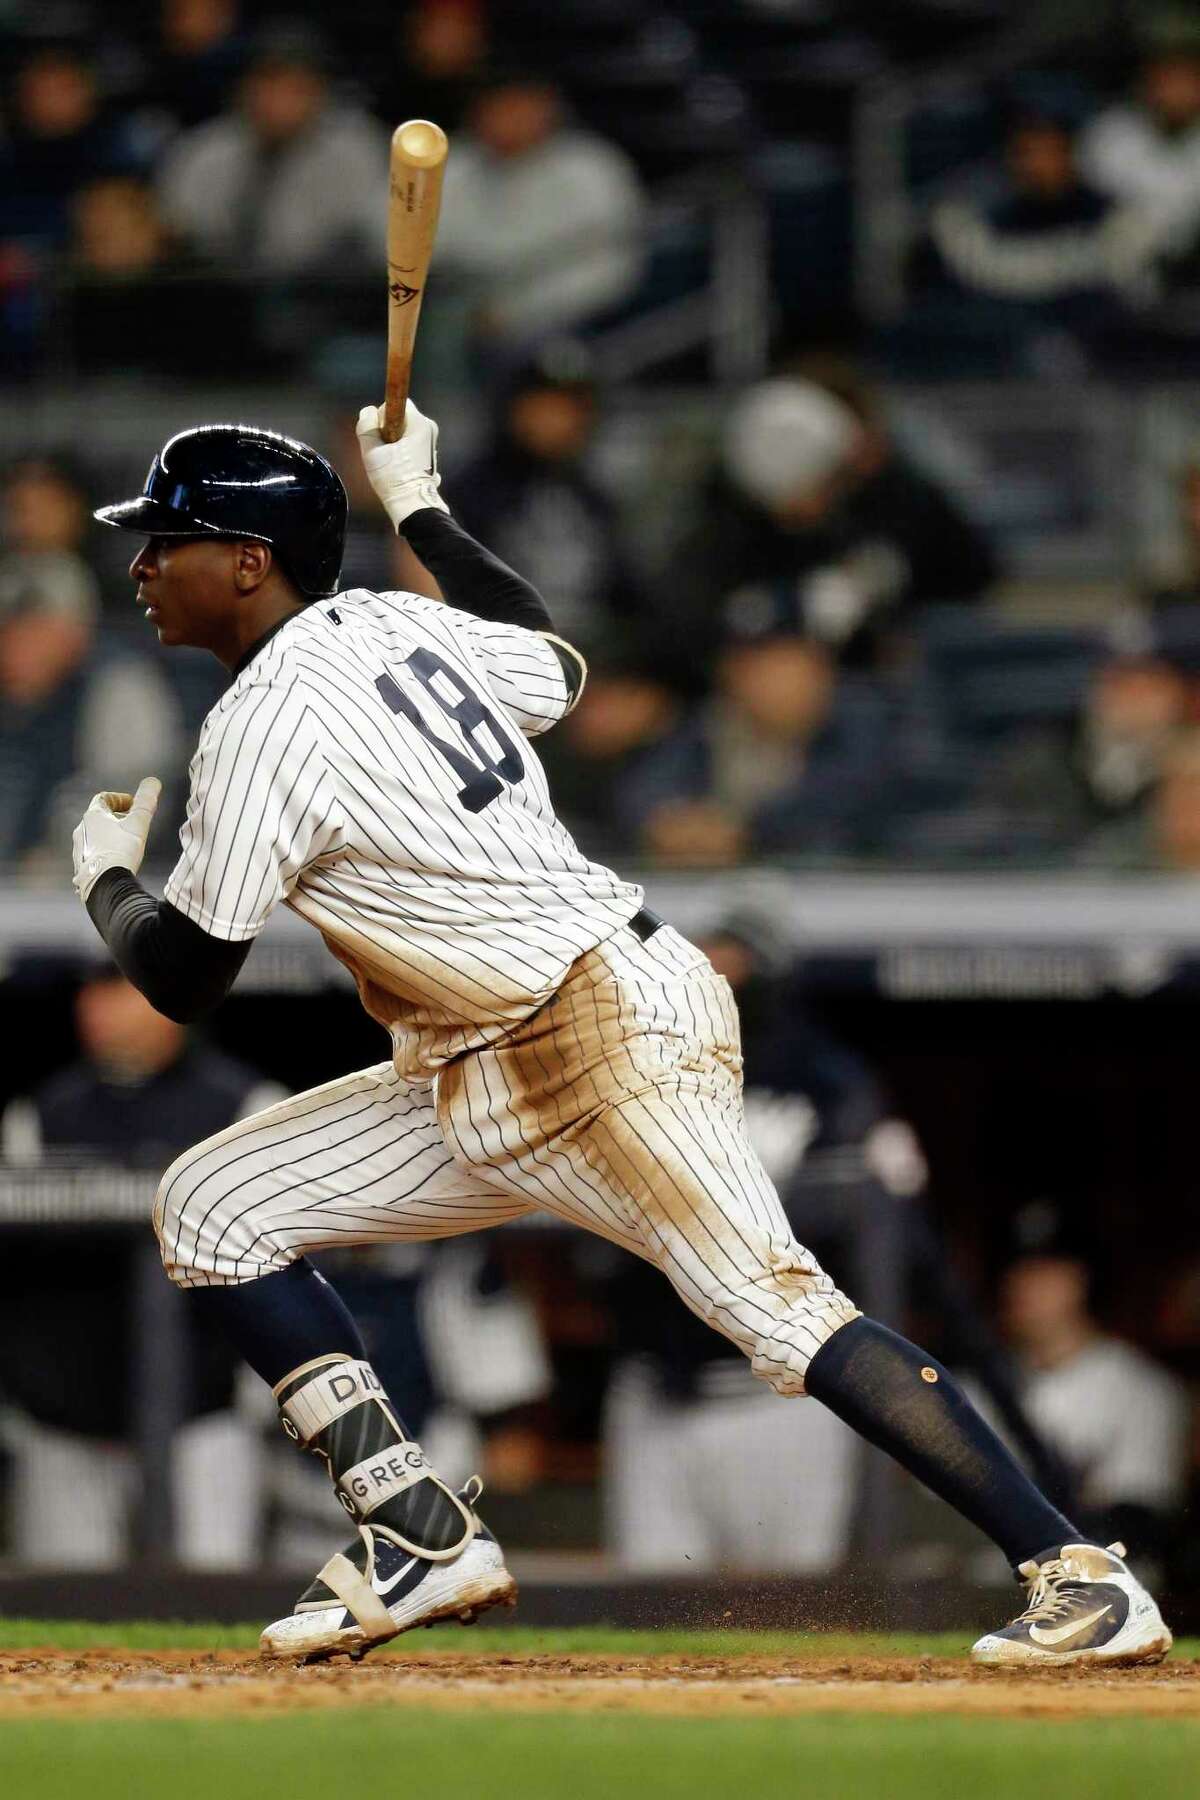 NEW YORK, NY - APRIL 19: Didi Gregorius #18 of the New York Yankees hits an RBI single against the Toronto Blue Jays during the fifth inning at Yankee Stadium on April 19, 2018 in the Bronx borough of New York City. (Photo by Adam Hunger/Getty Images)